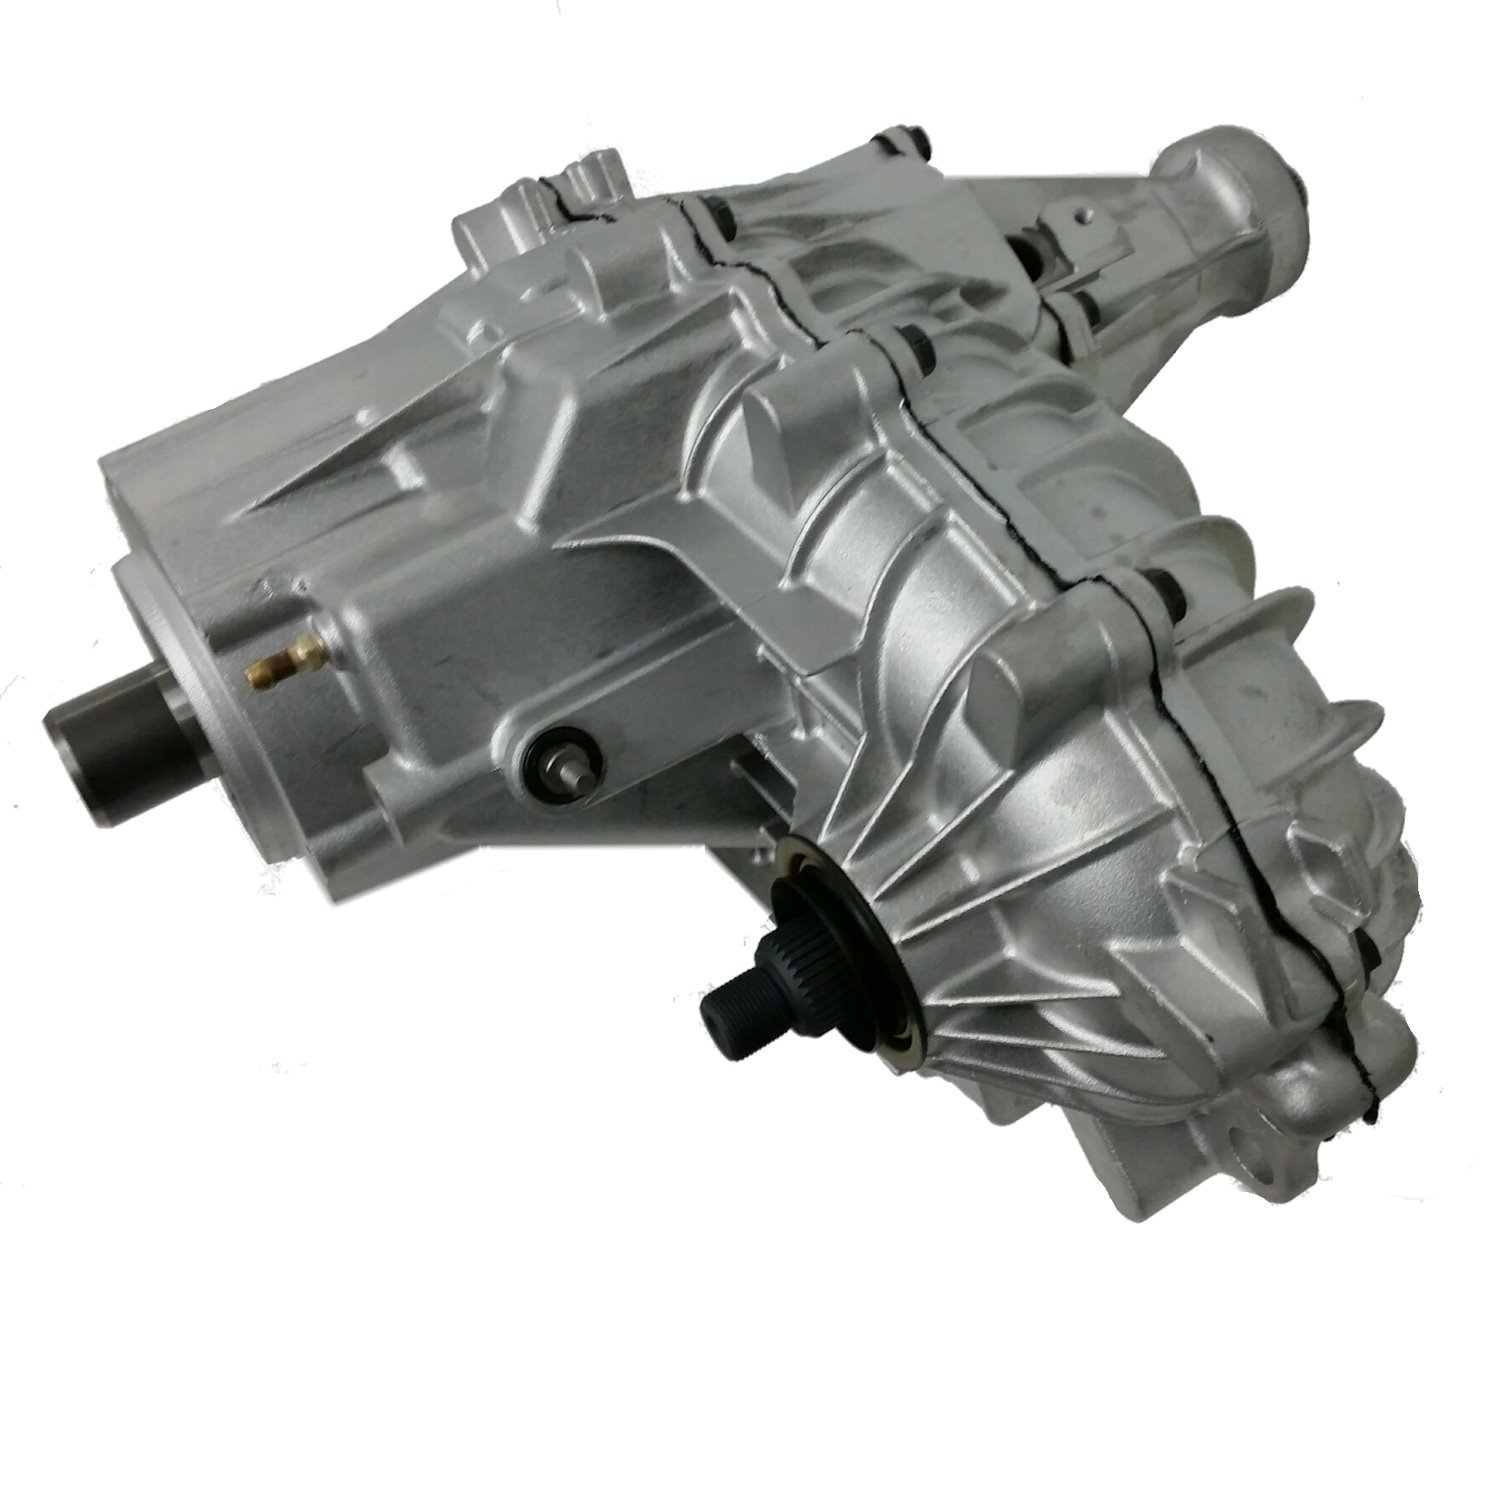 Remanufactured BW1370 & BW4401 Transfer Case for GM 95-00 K3500